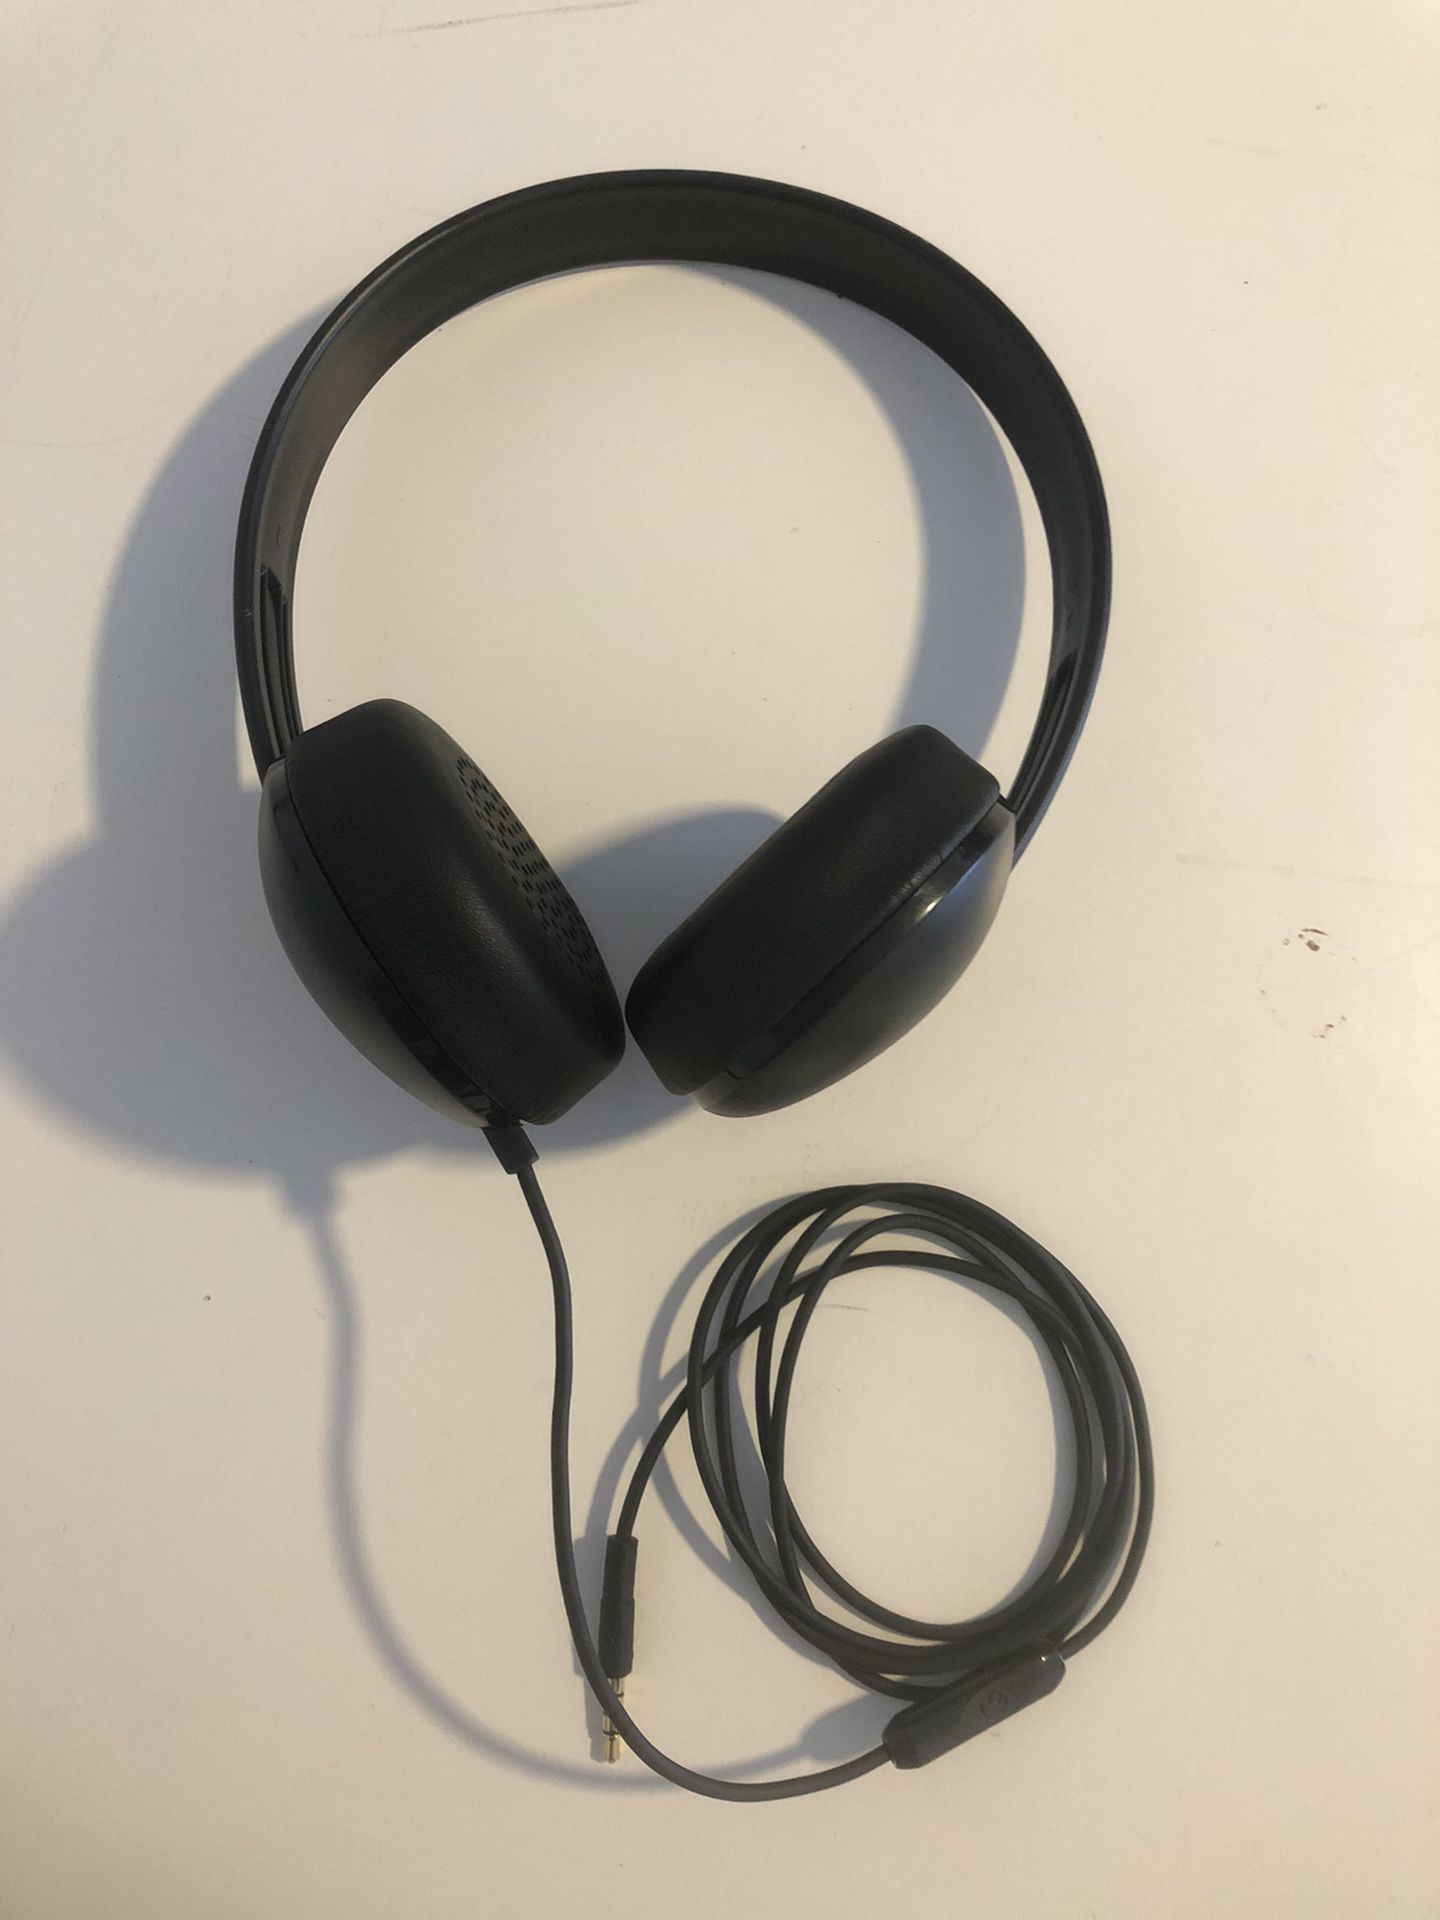 Skullcandy headphones with microphone for mobile phones